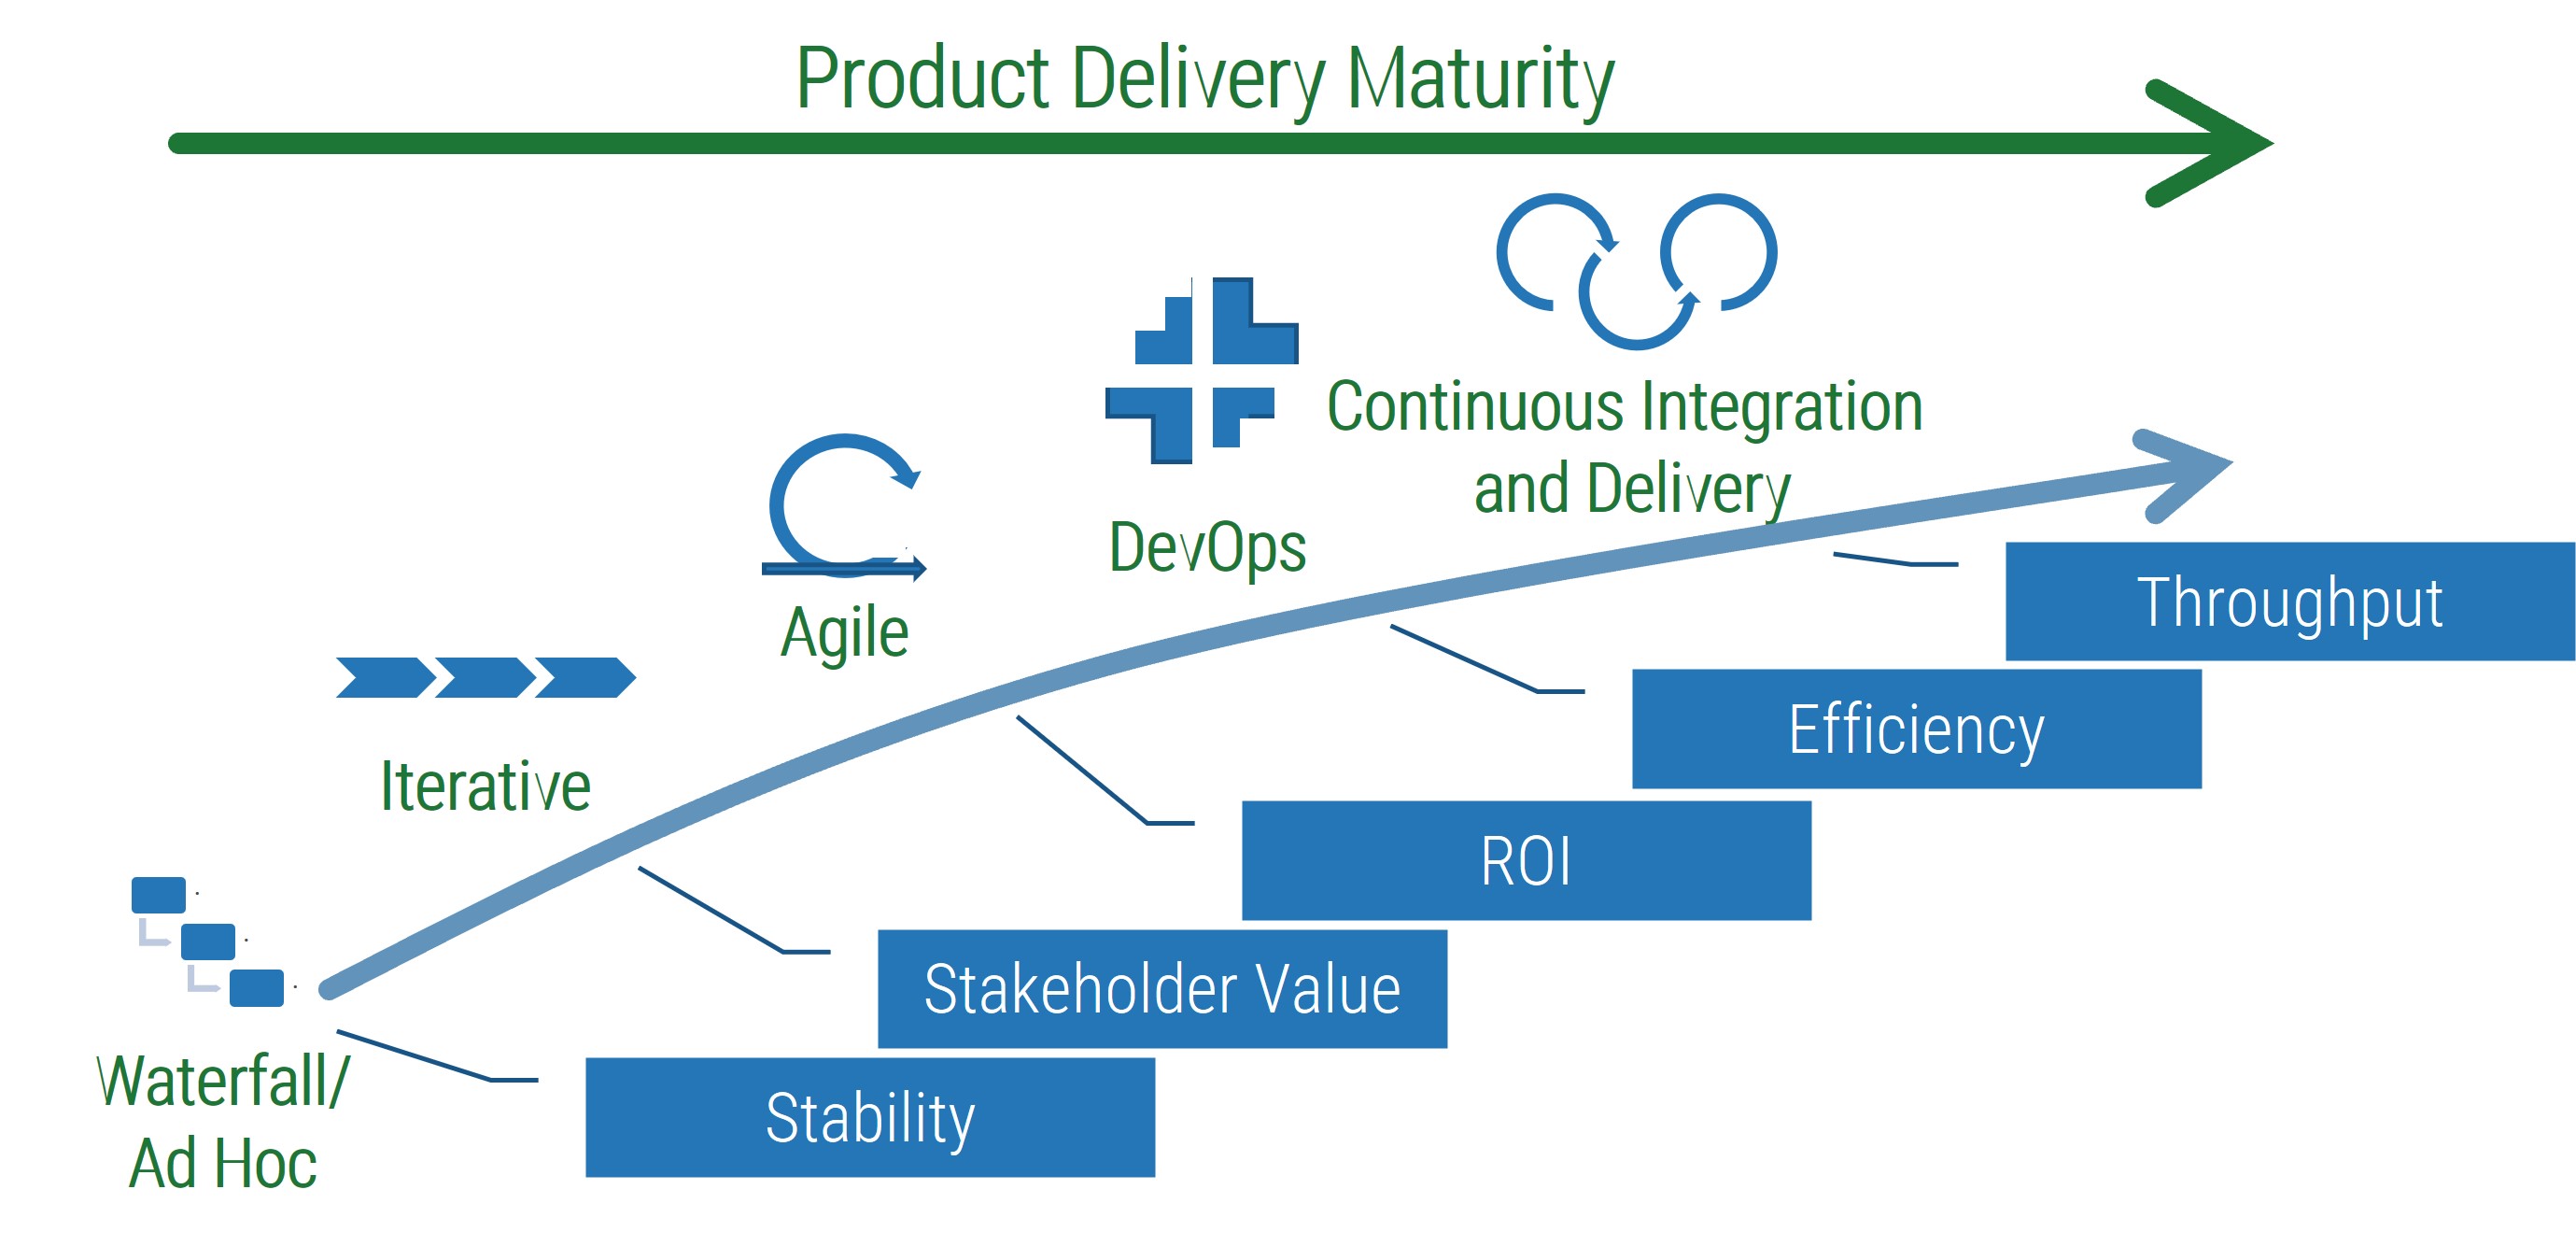 A flowchart is shown to demonstrate the product deliery maturity and the Agile DevOps used.